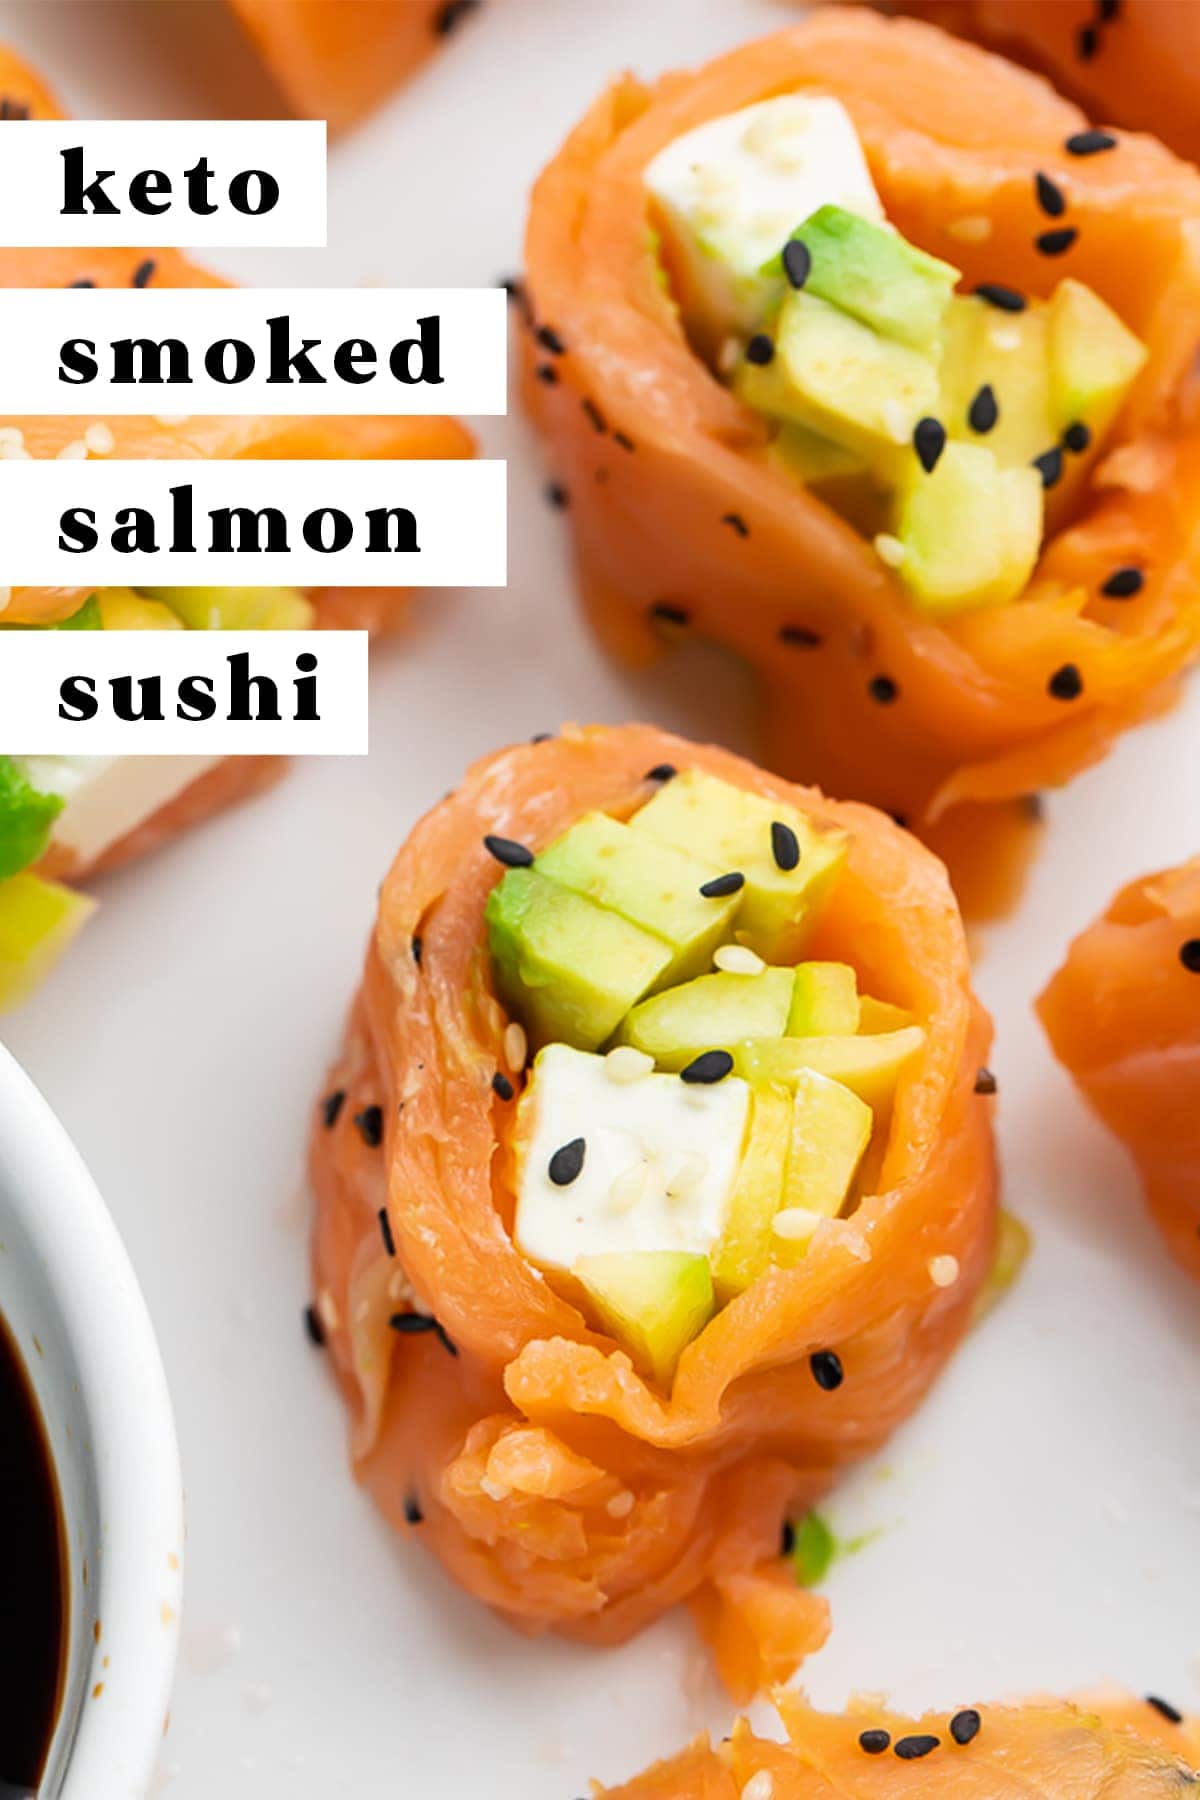 Keto Sushi Rolls with Smoked Salmon | Plaeo Diet